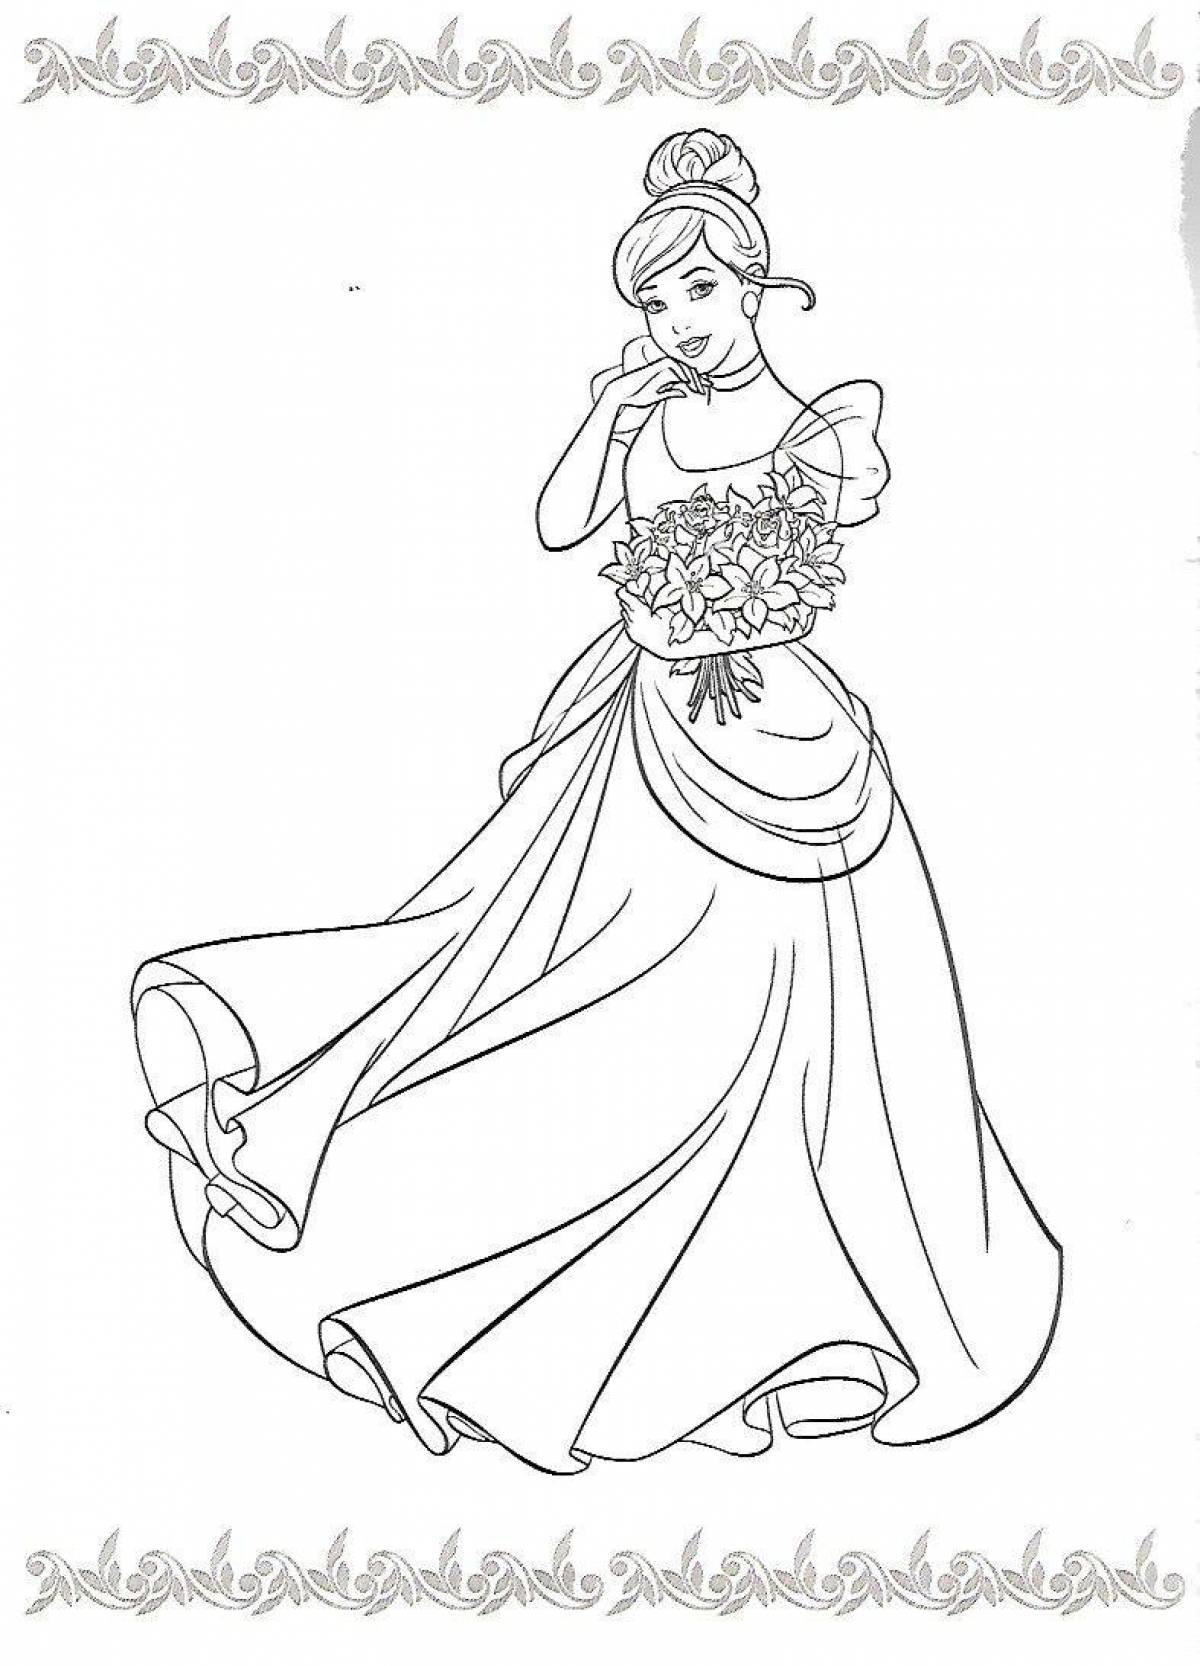 Luxury coloring of the princess in beautiful dresses